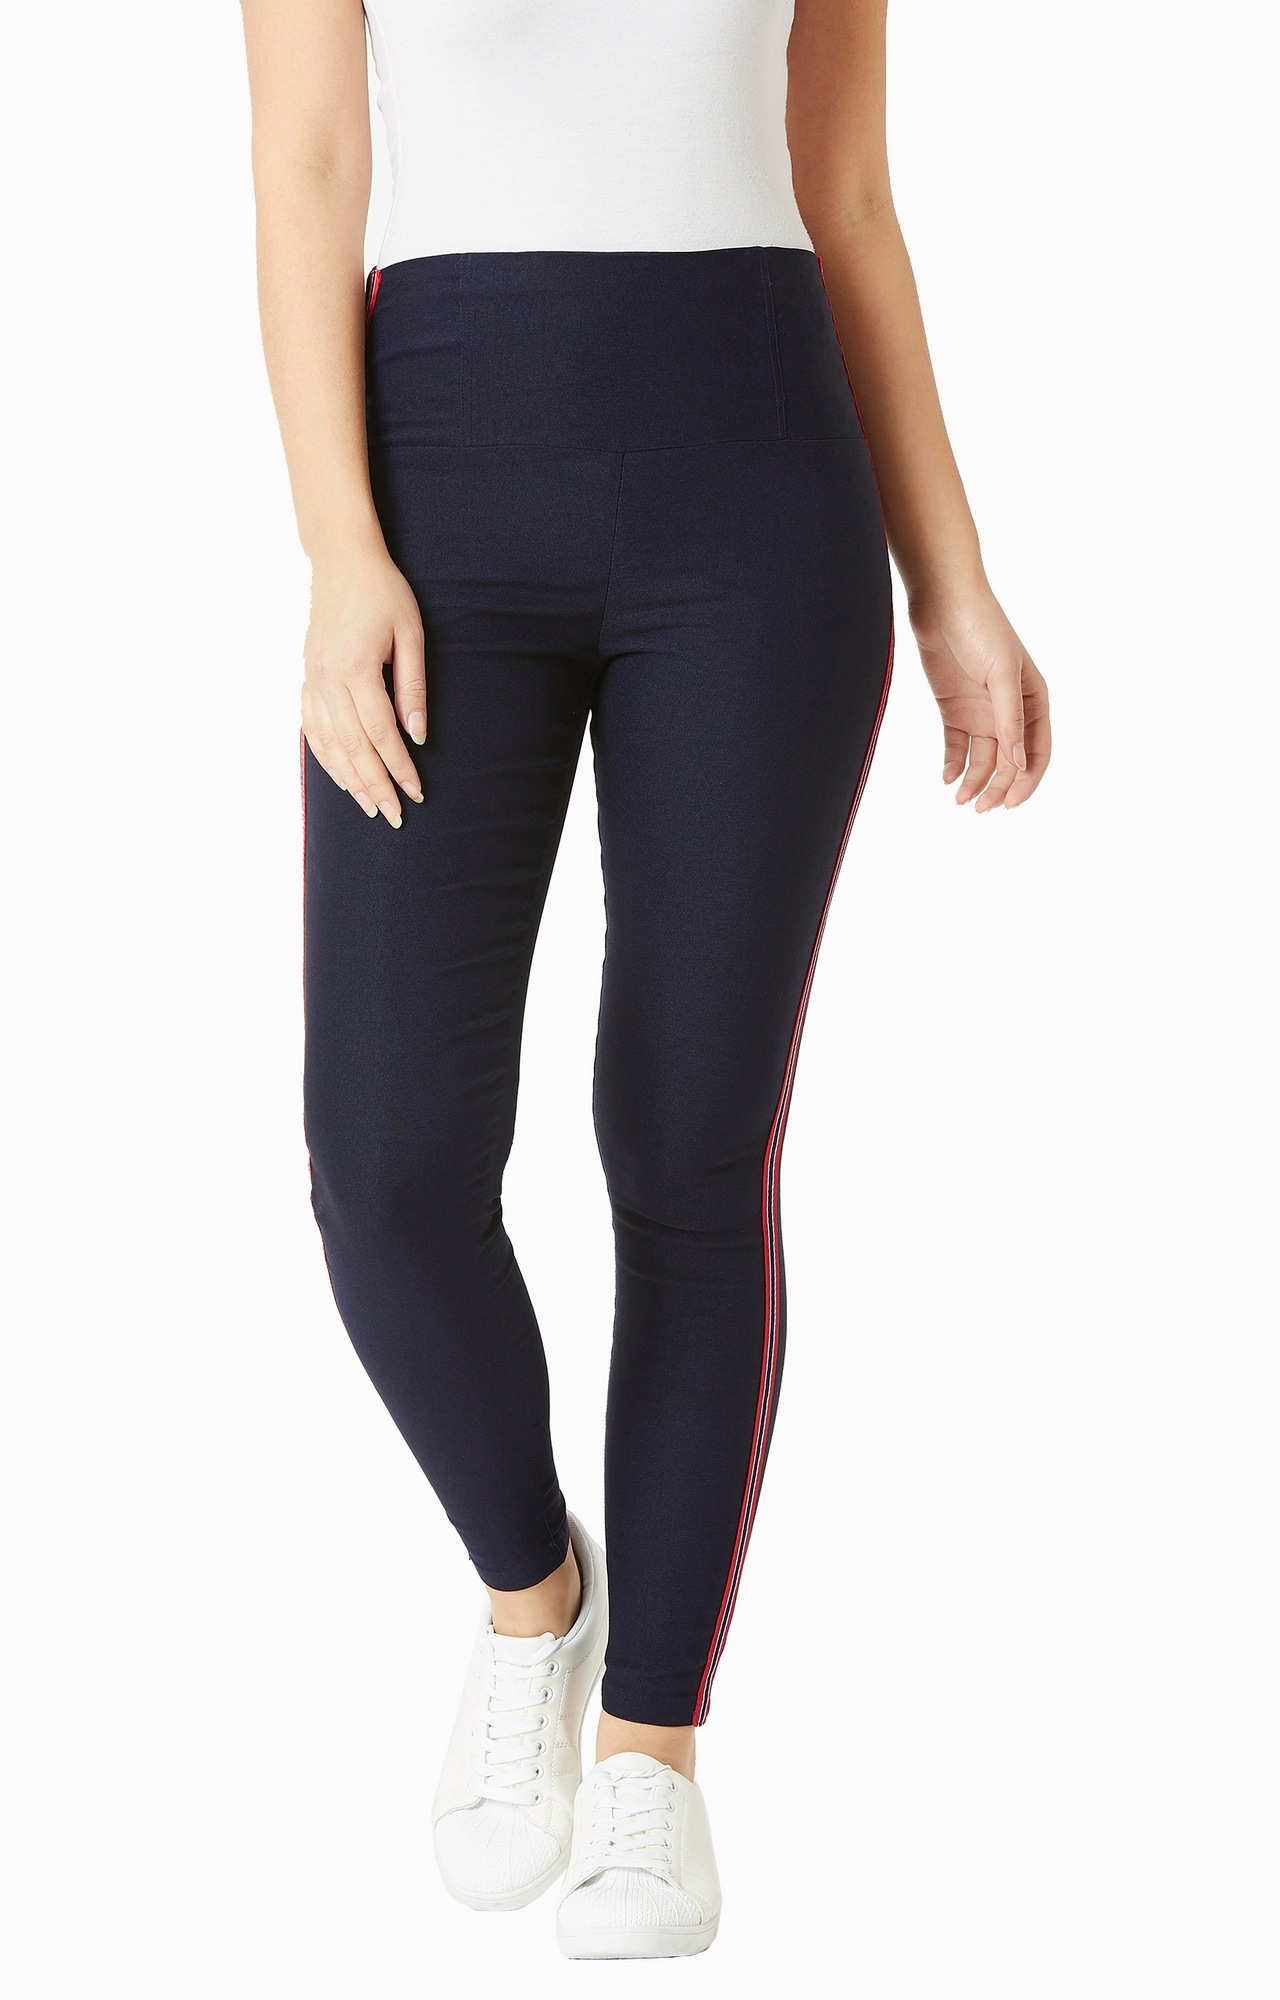 MISS CHASE | Navy Blue Jeggings